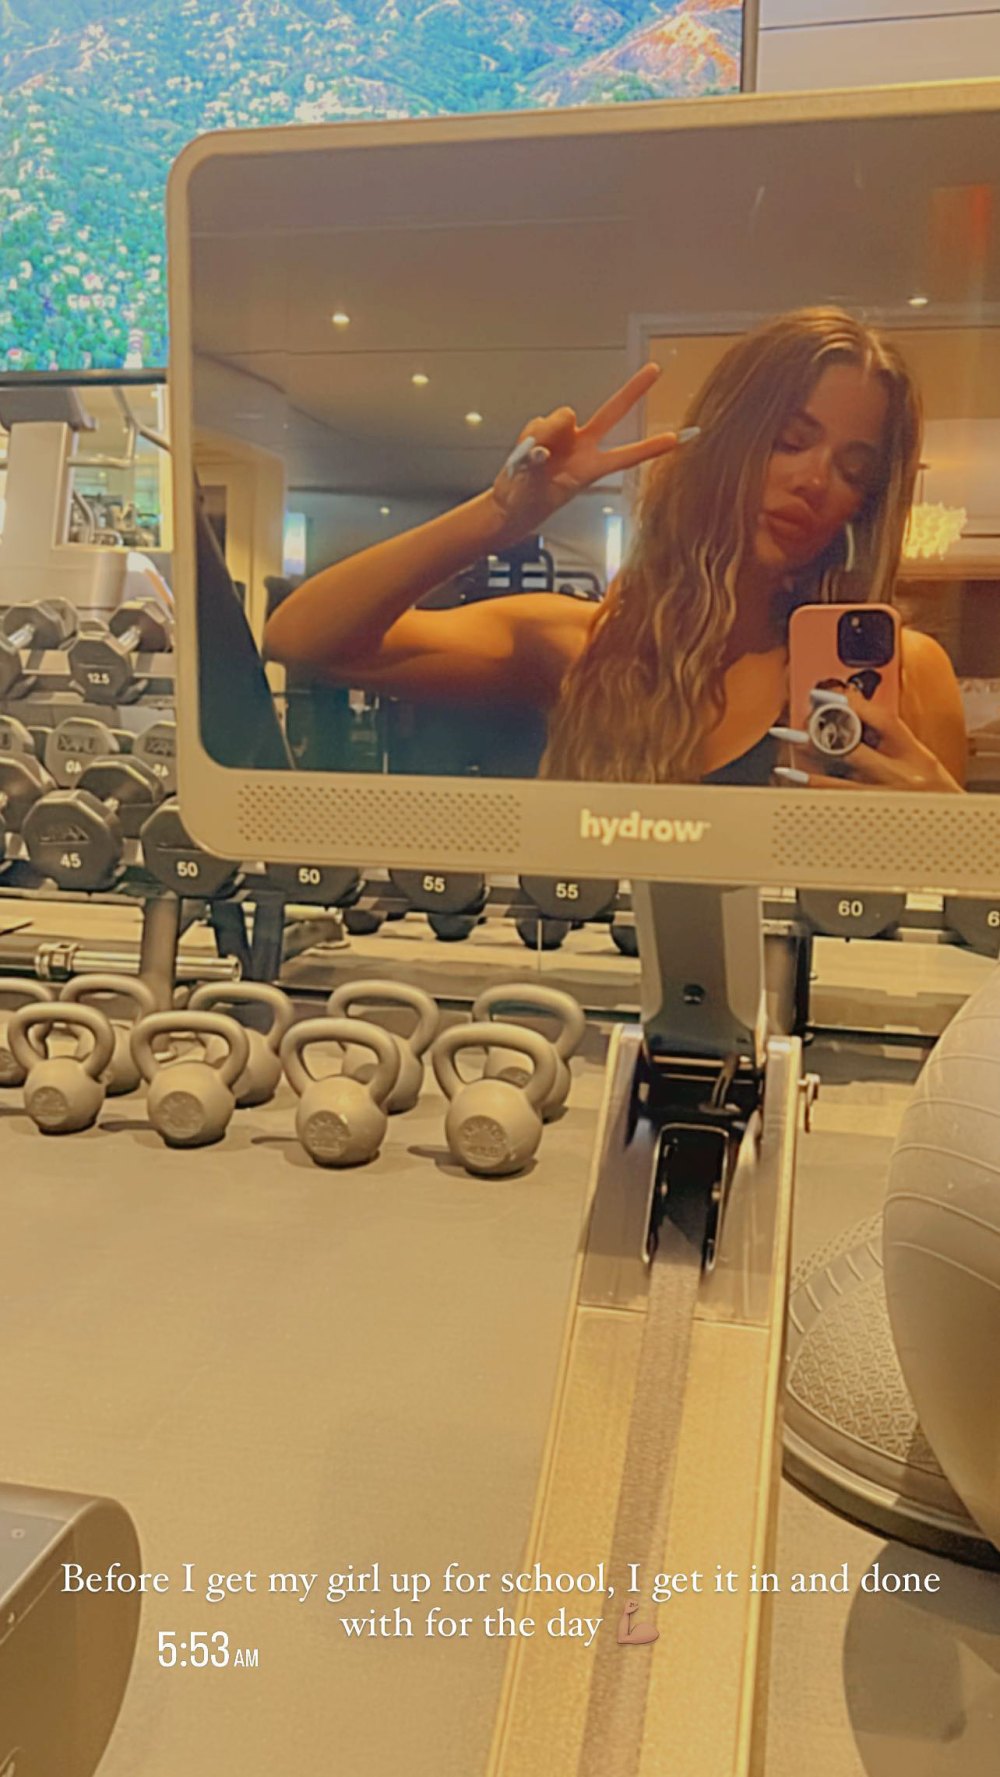 Khloe Kardashian Details Her Early Morning Workout as a Mom of 2- ‘I Get It in and Done’ -552